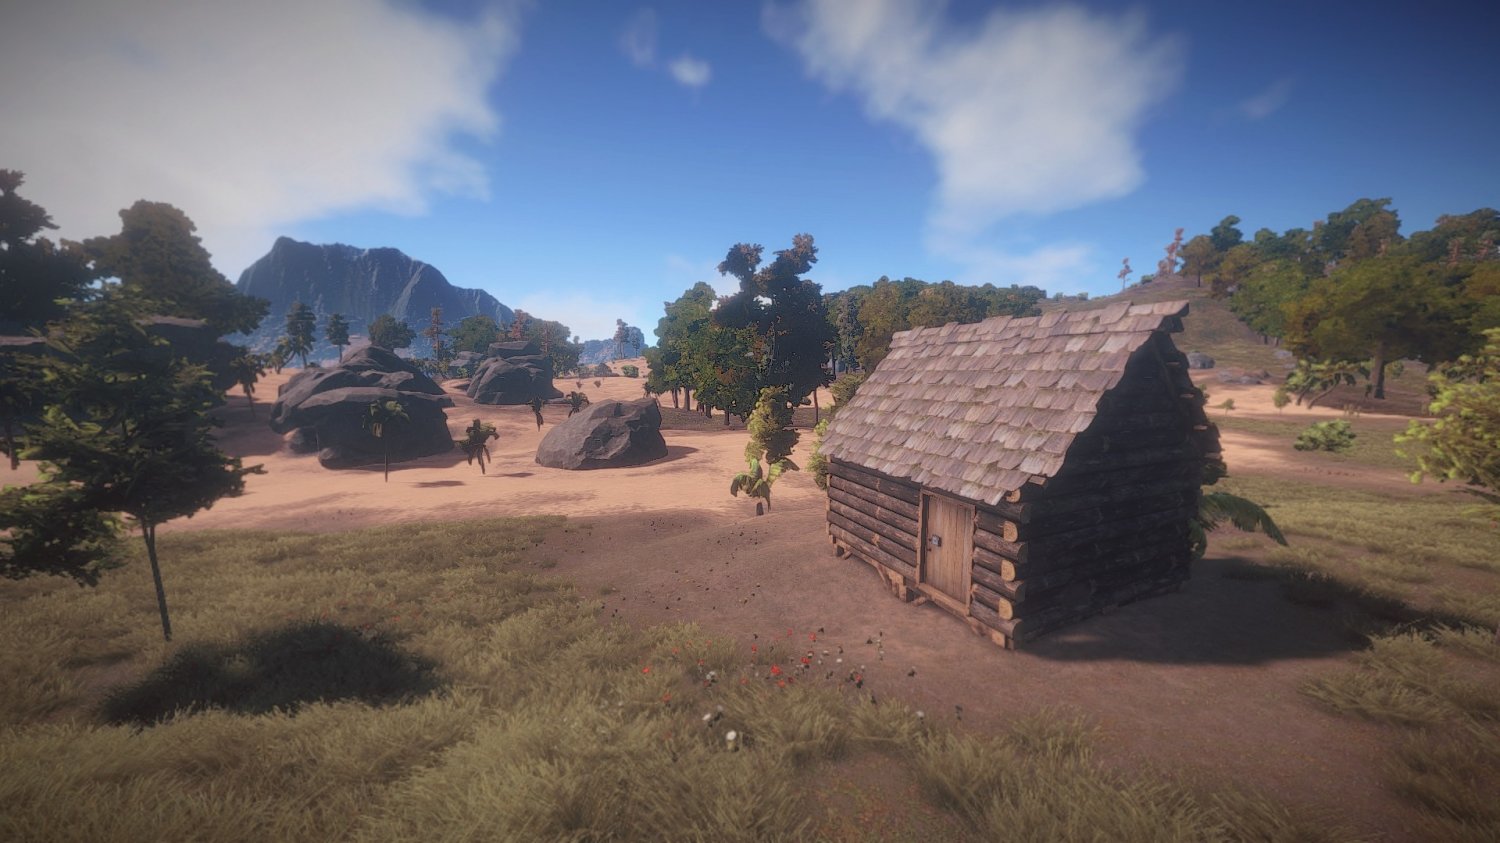 download rust for free windows 10